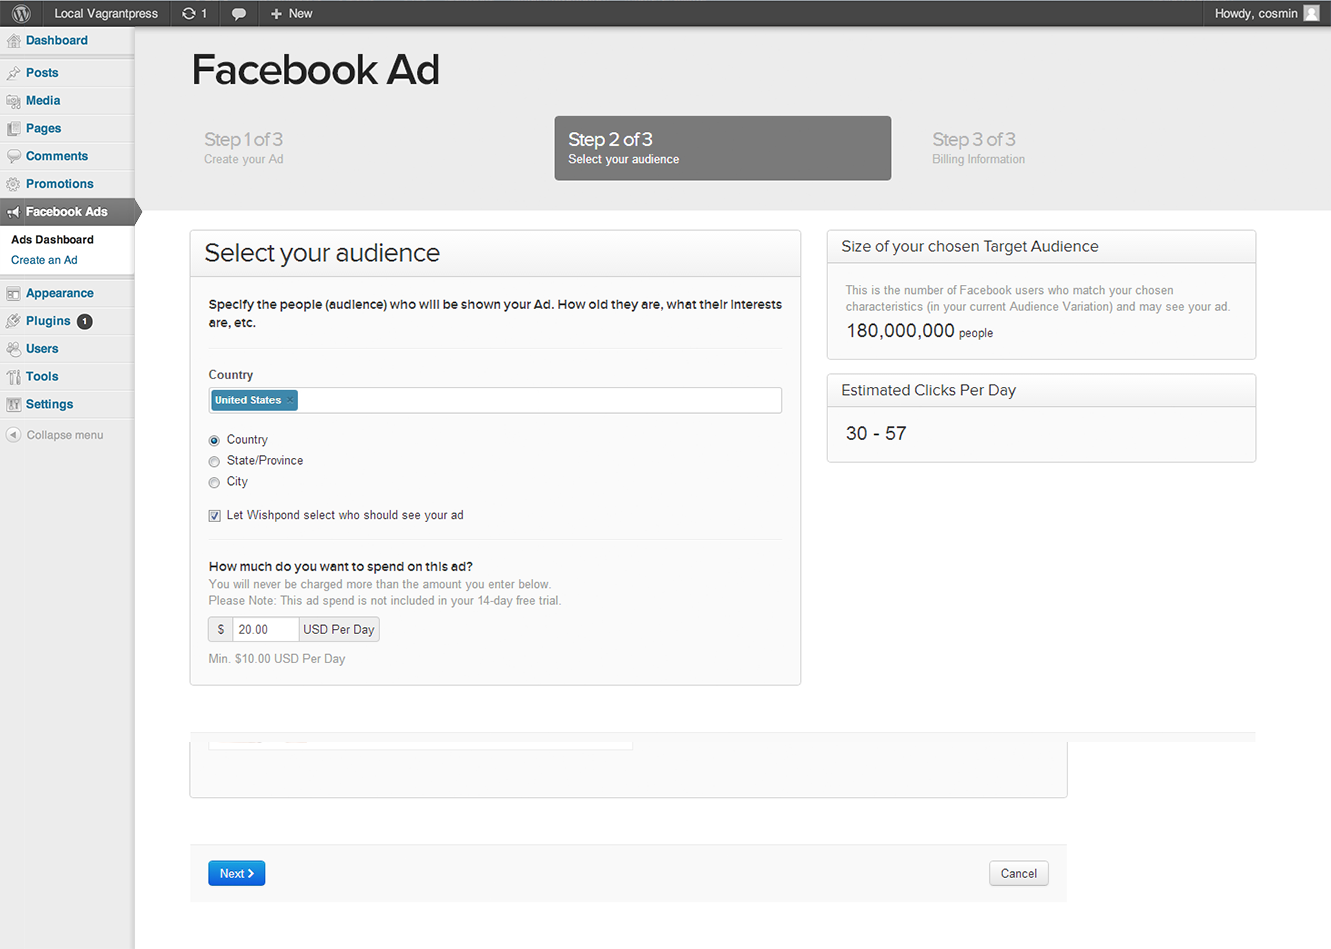 Create a Facebook Ad in your Wordpress Admin (Part 2)